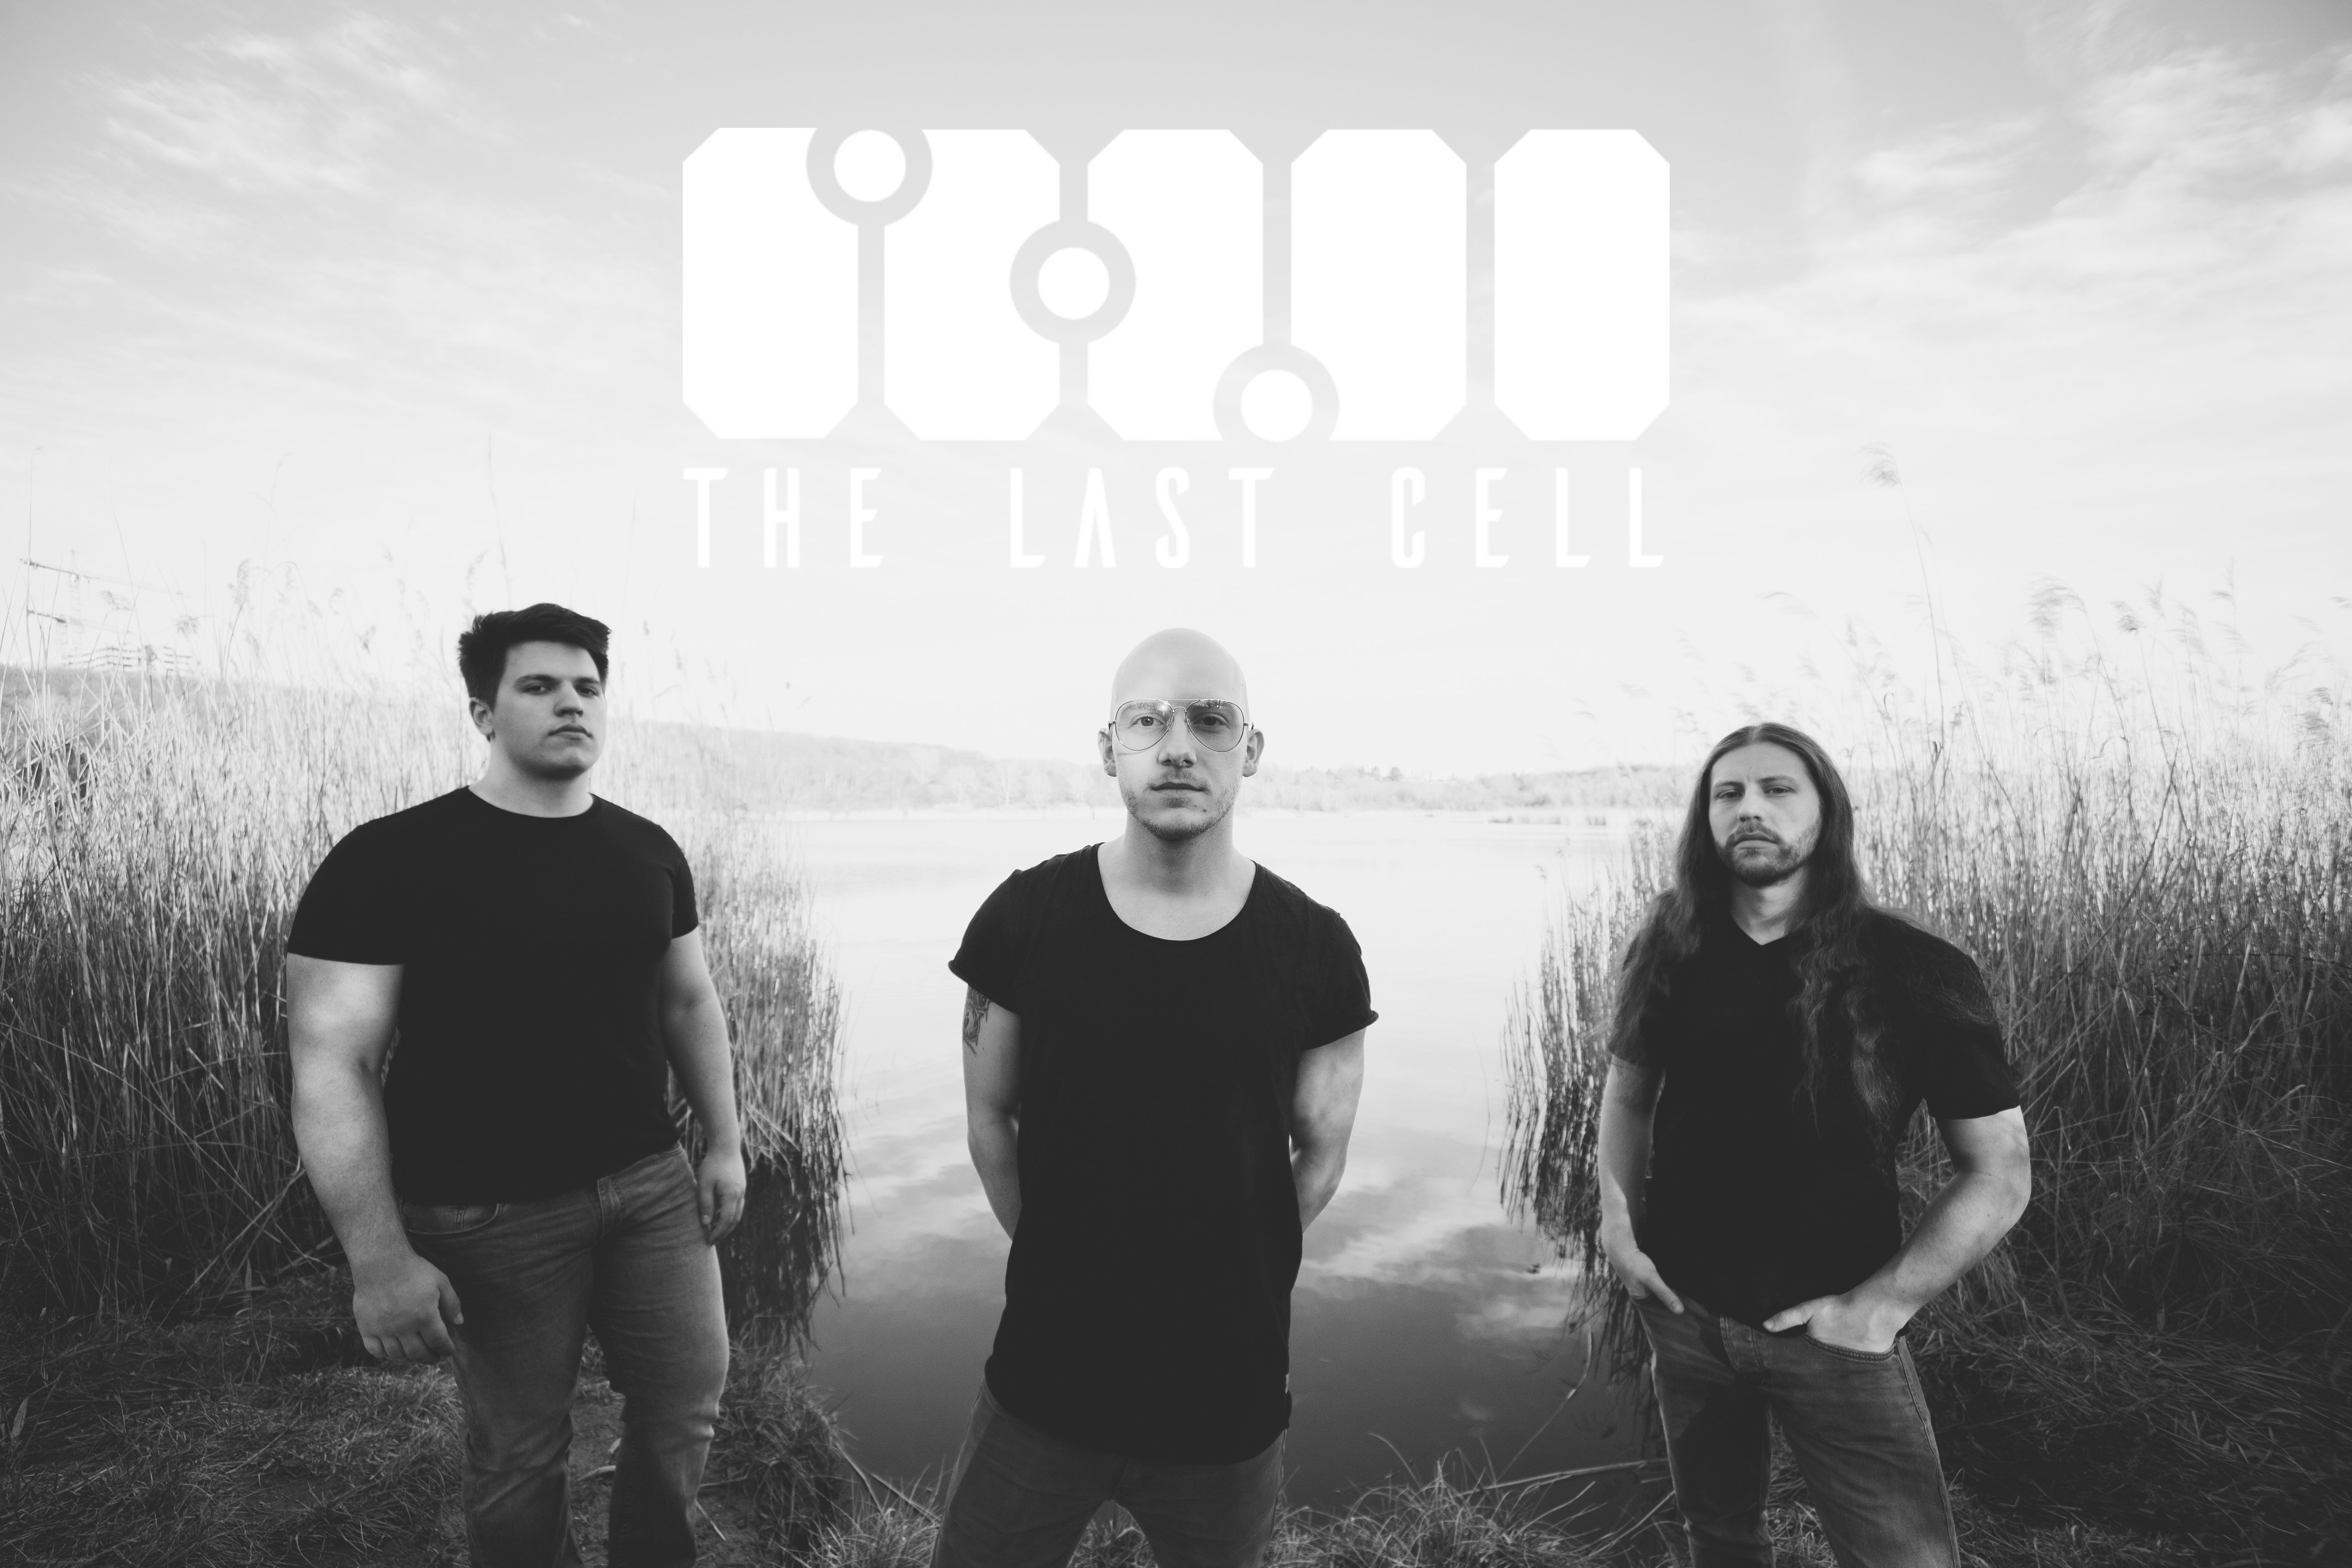 The Last Cell